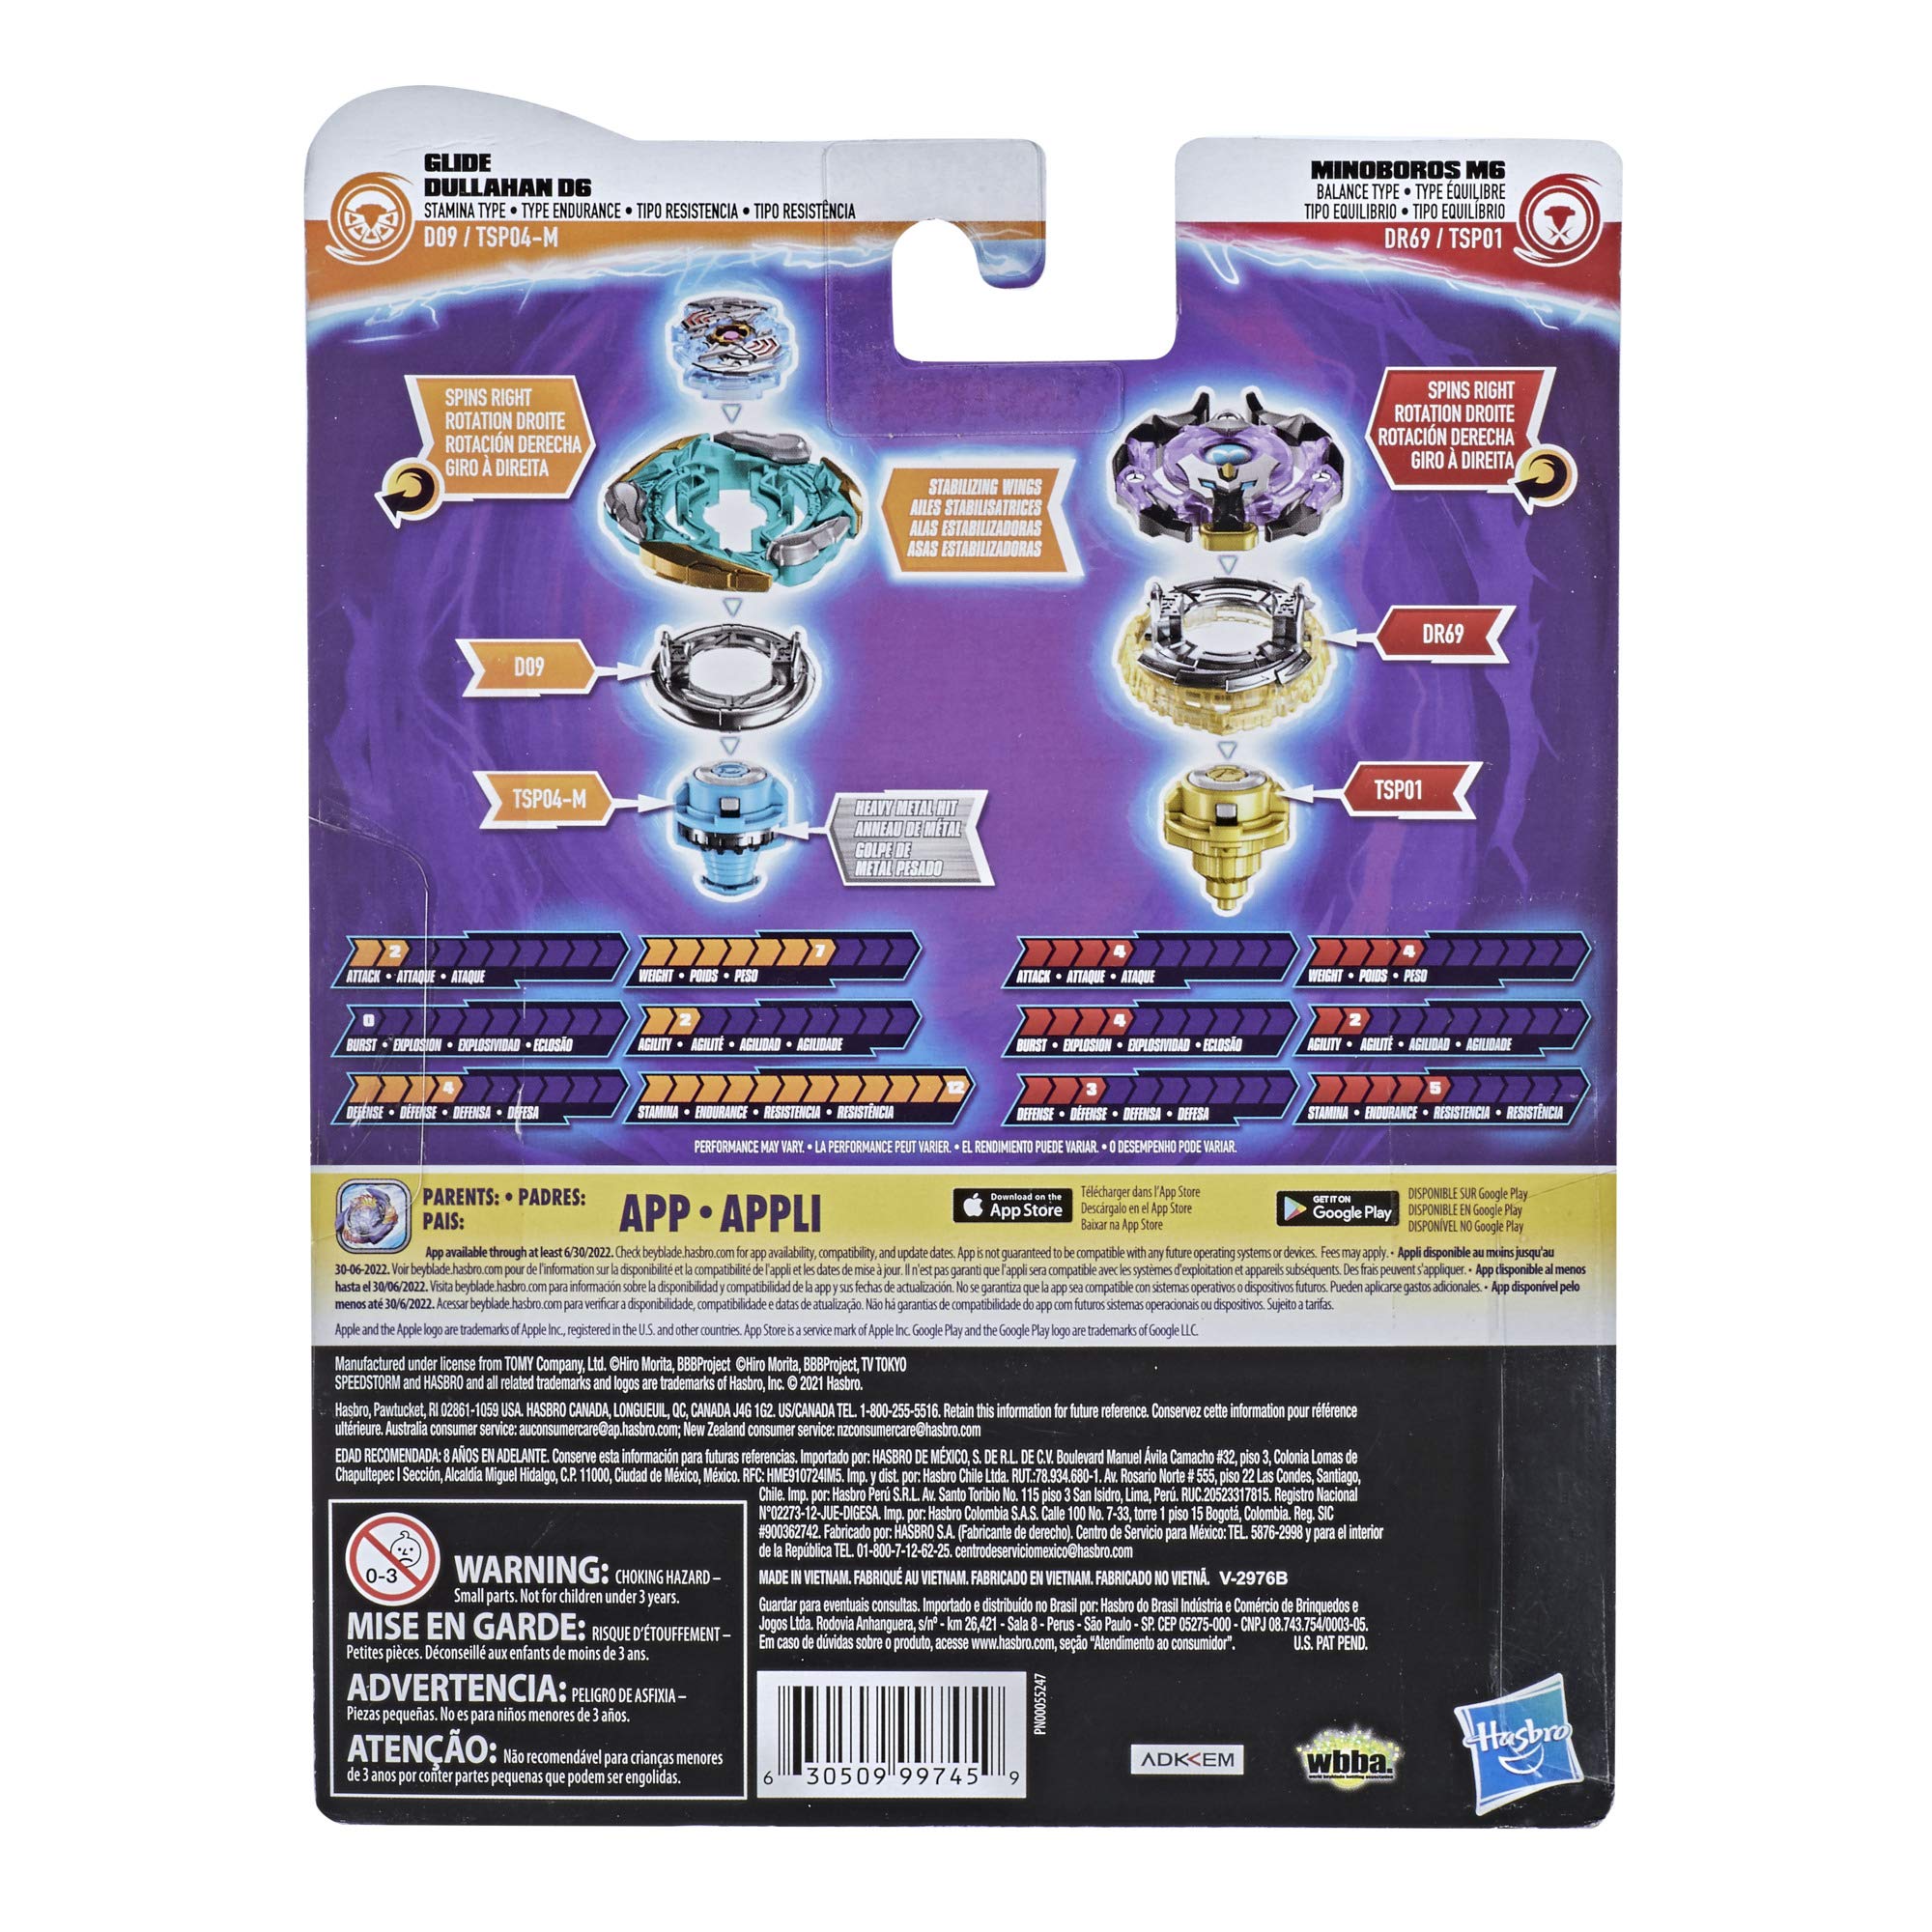 BEYBLADE Burst Surge Speedstorm Glide Dullahan D6 and Minoboros M6 Spinning Top Dual Pack -- 2 Battling Game Top Toy for Kids Ages 8 and Up